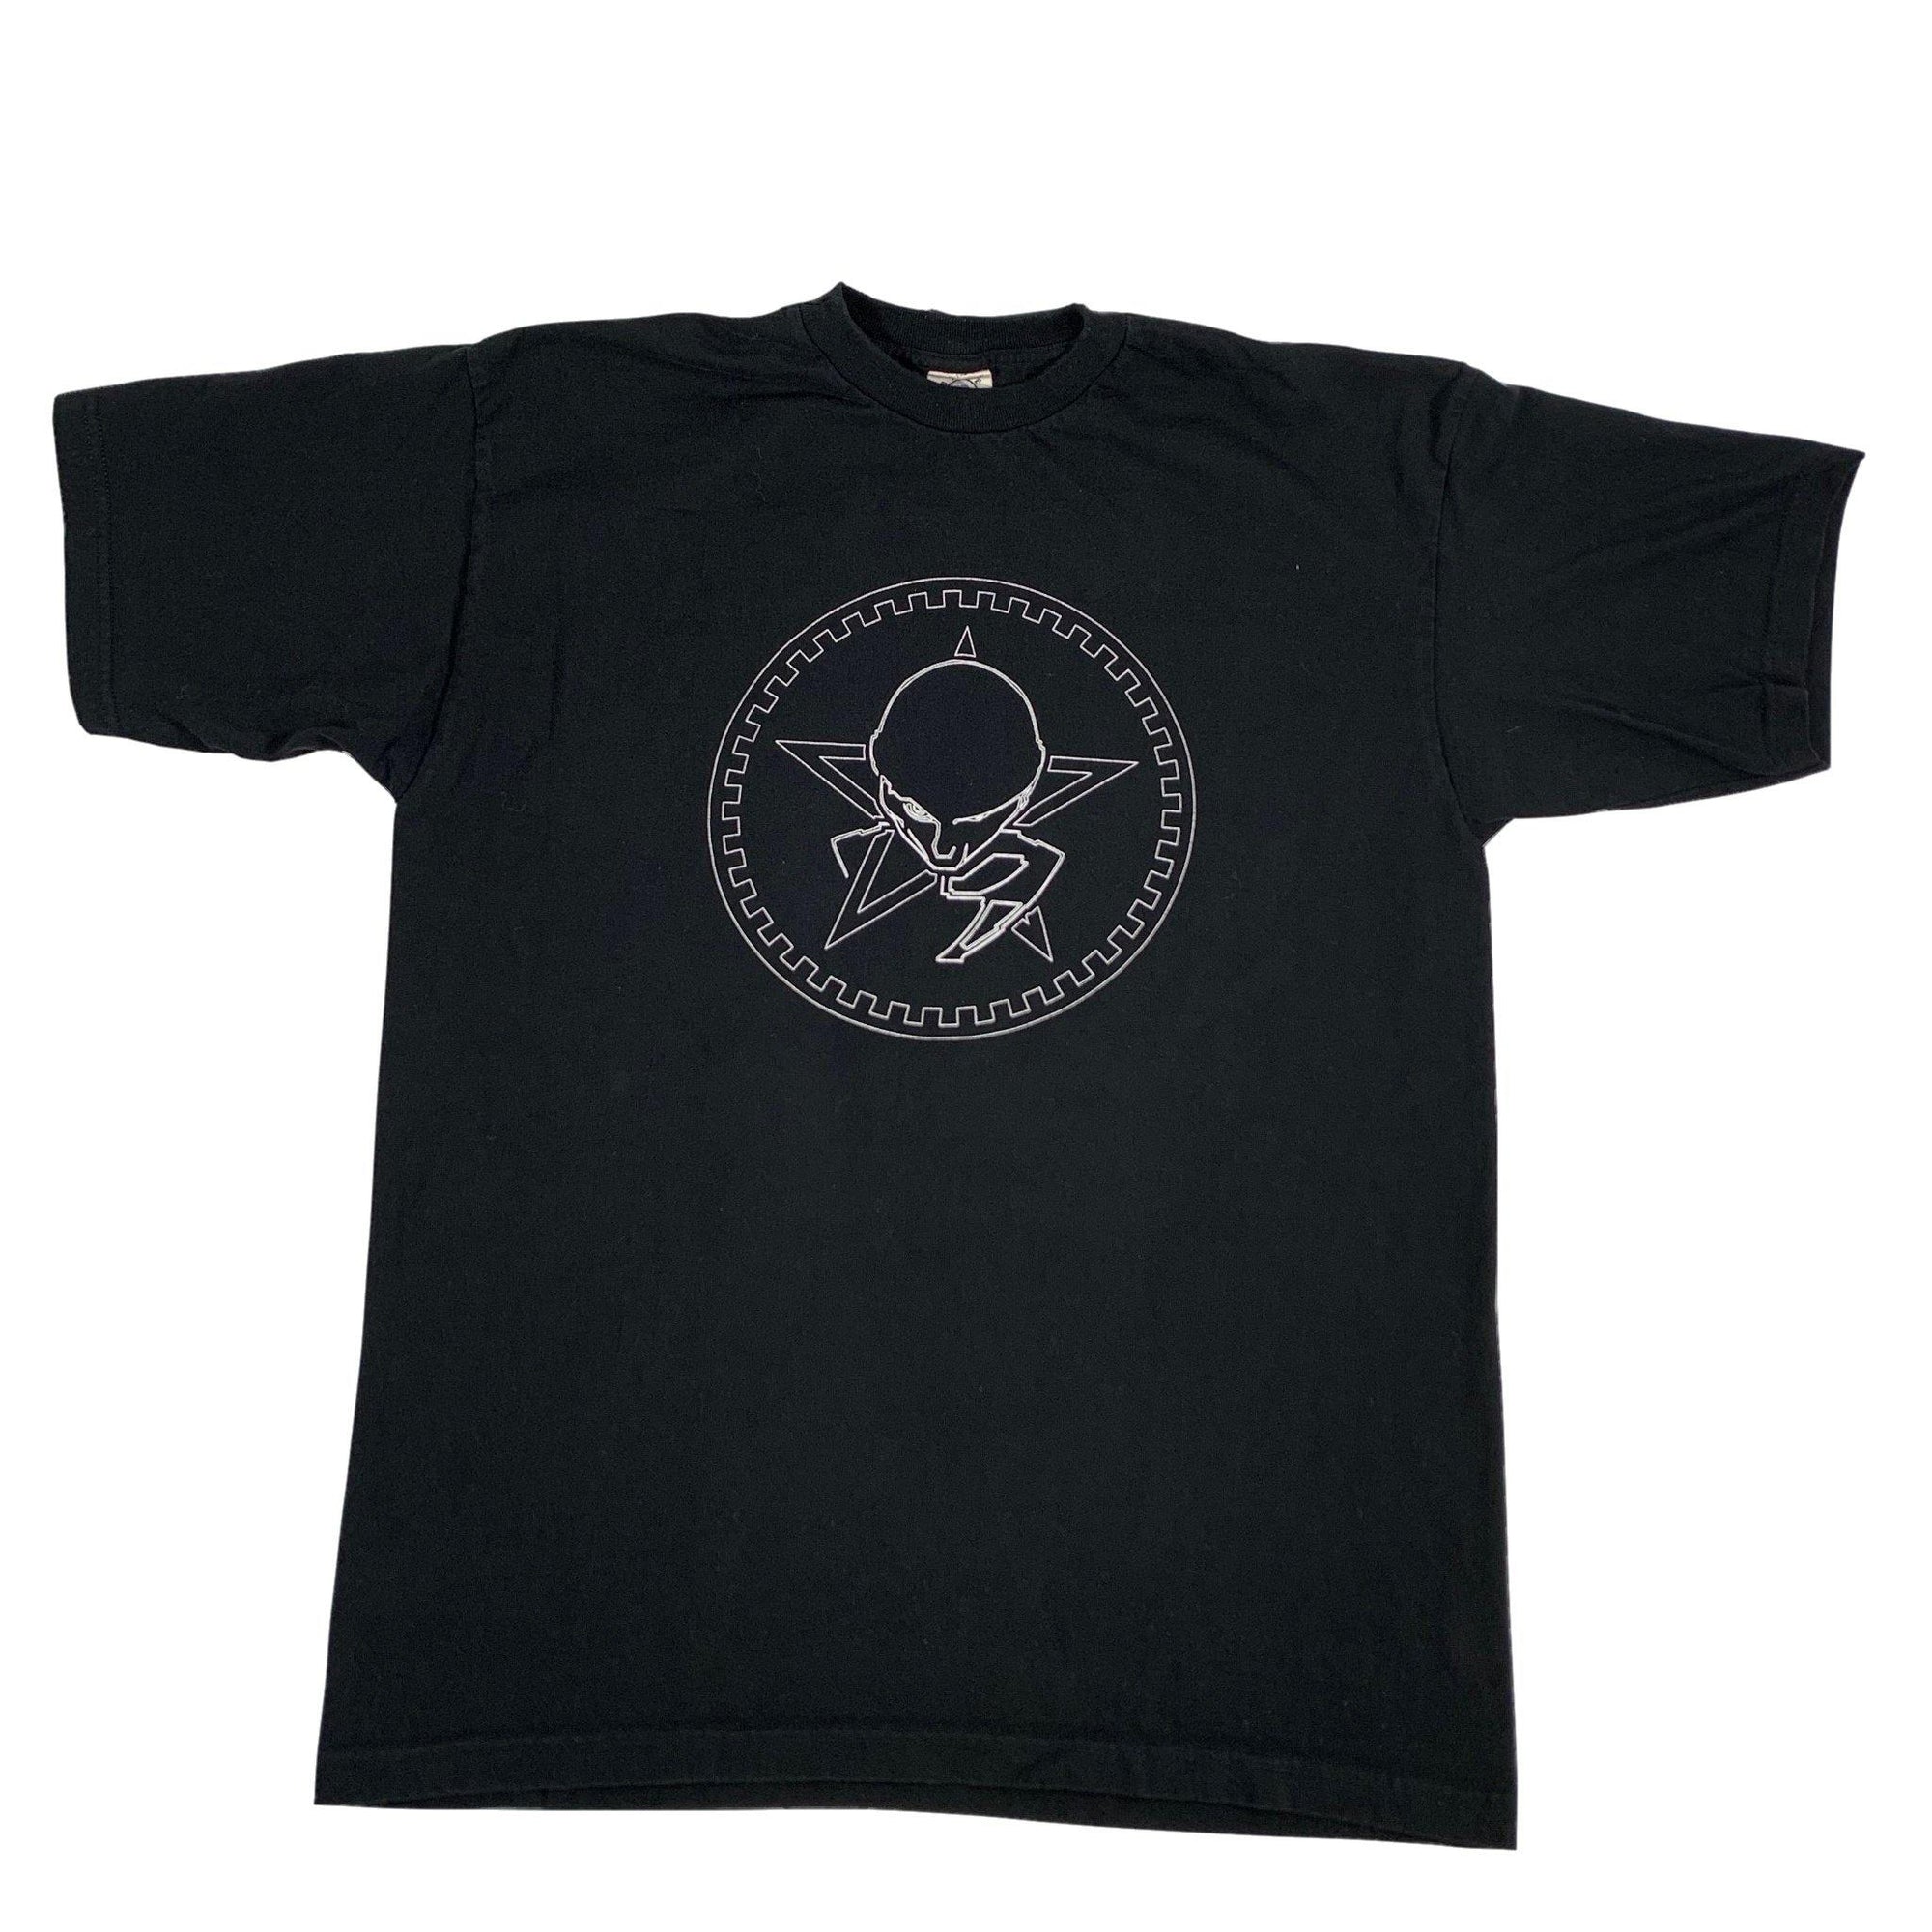 Vintage The Sisters Of Mercy "Reptile House" T-Shirt - jointcustodydc